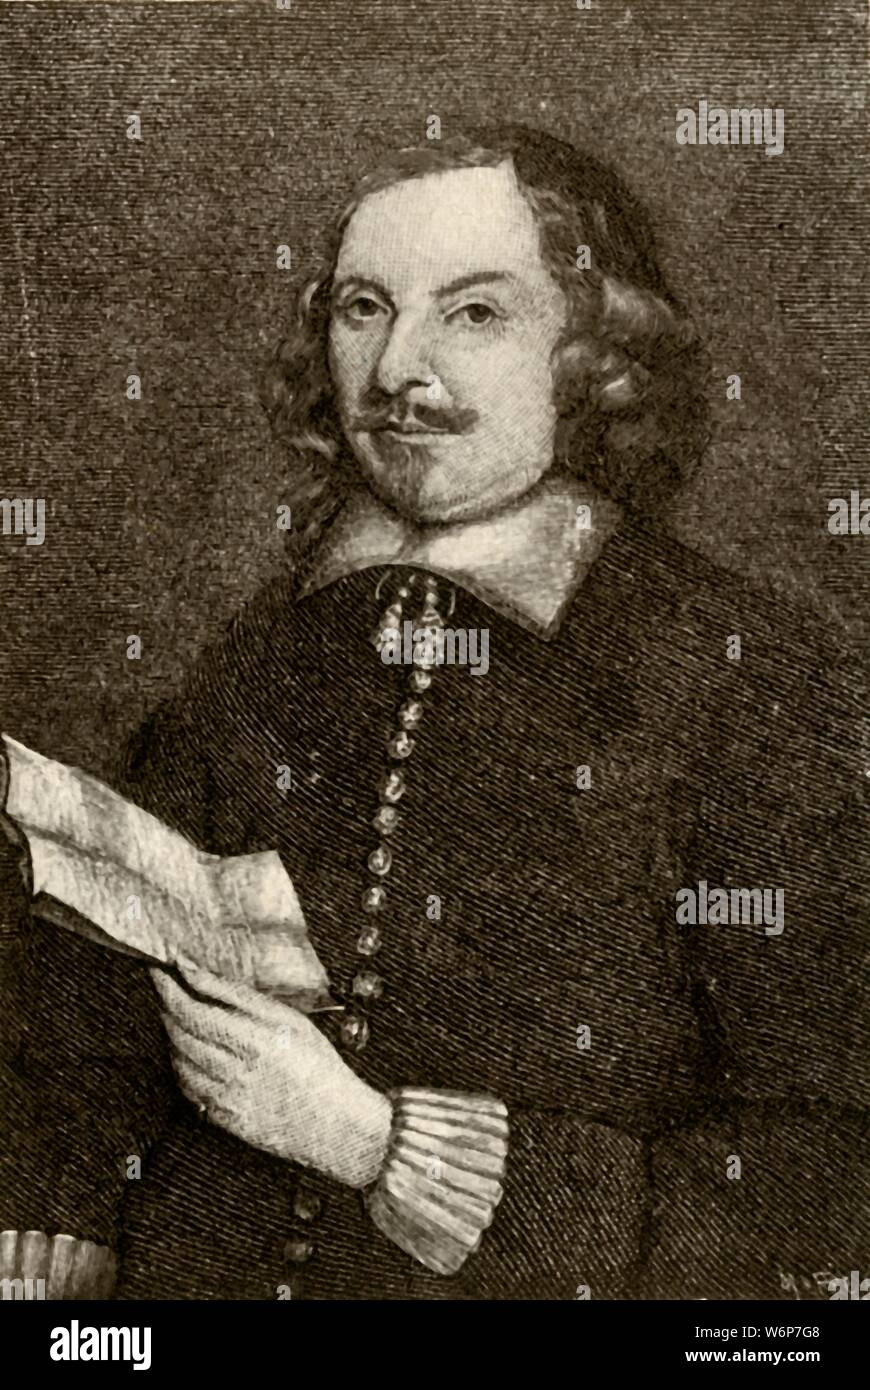 'Picture of Edward Winslow, Governor of Plymouth Colony, in Puritan dress', 1644, (1937). Edward Winslow (1595-1655) Separatist who traveled on the Mayflower in 1620. Leader at Plymouth Colony.  From &quot;History of American Costume - Book One 1607-1800&quot;, by Elisabeth McClellan. [Tudor Publishing Company, New York, 1937] Stock Photo